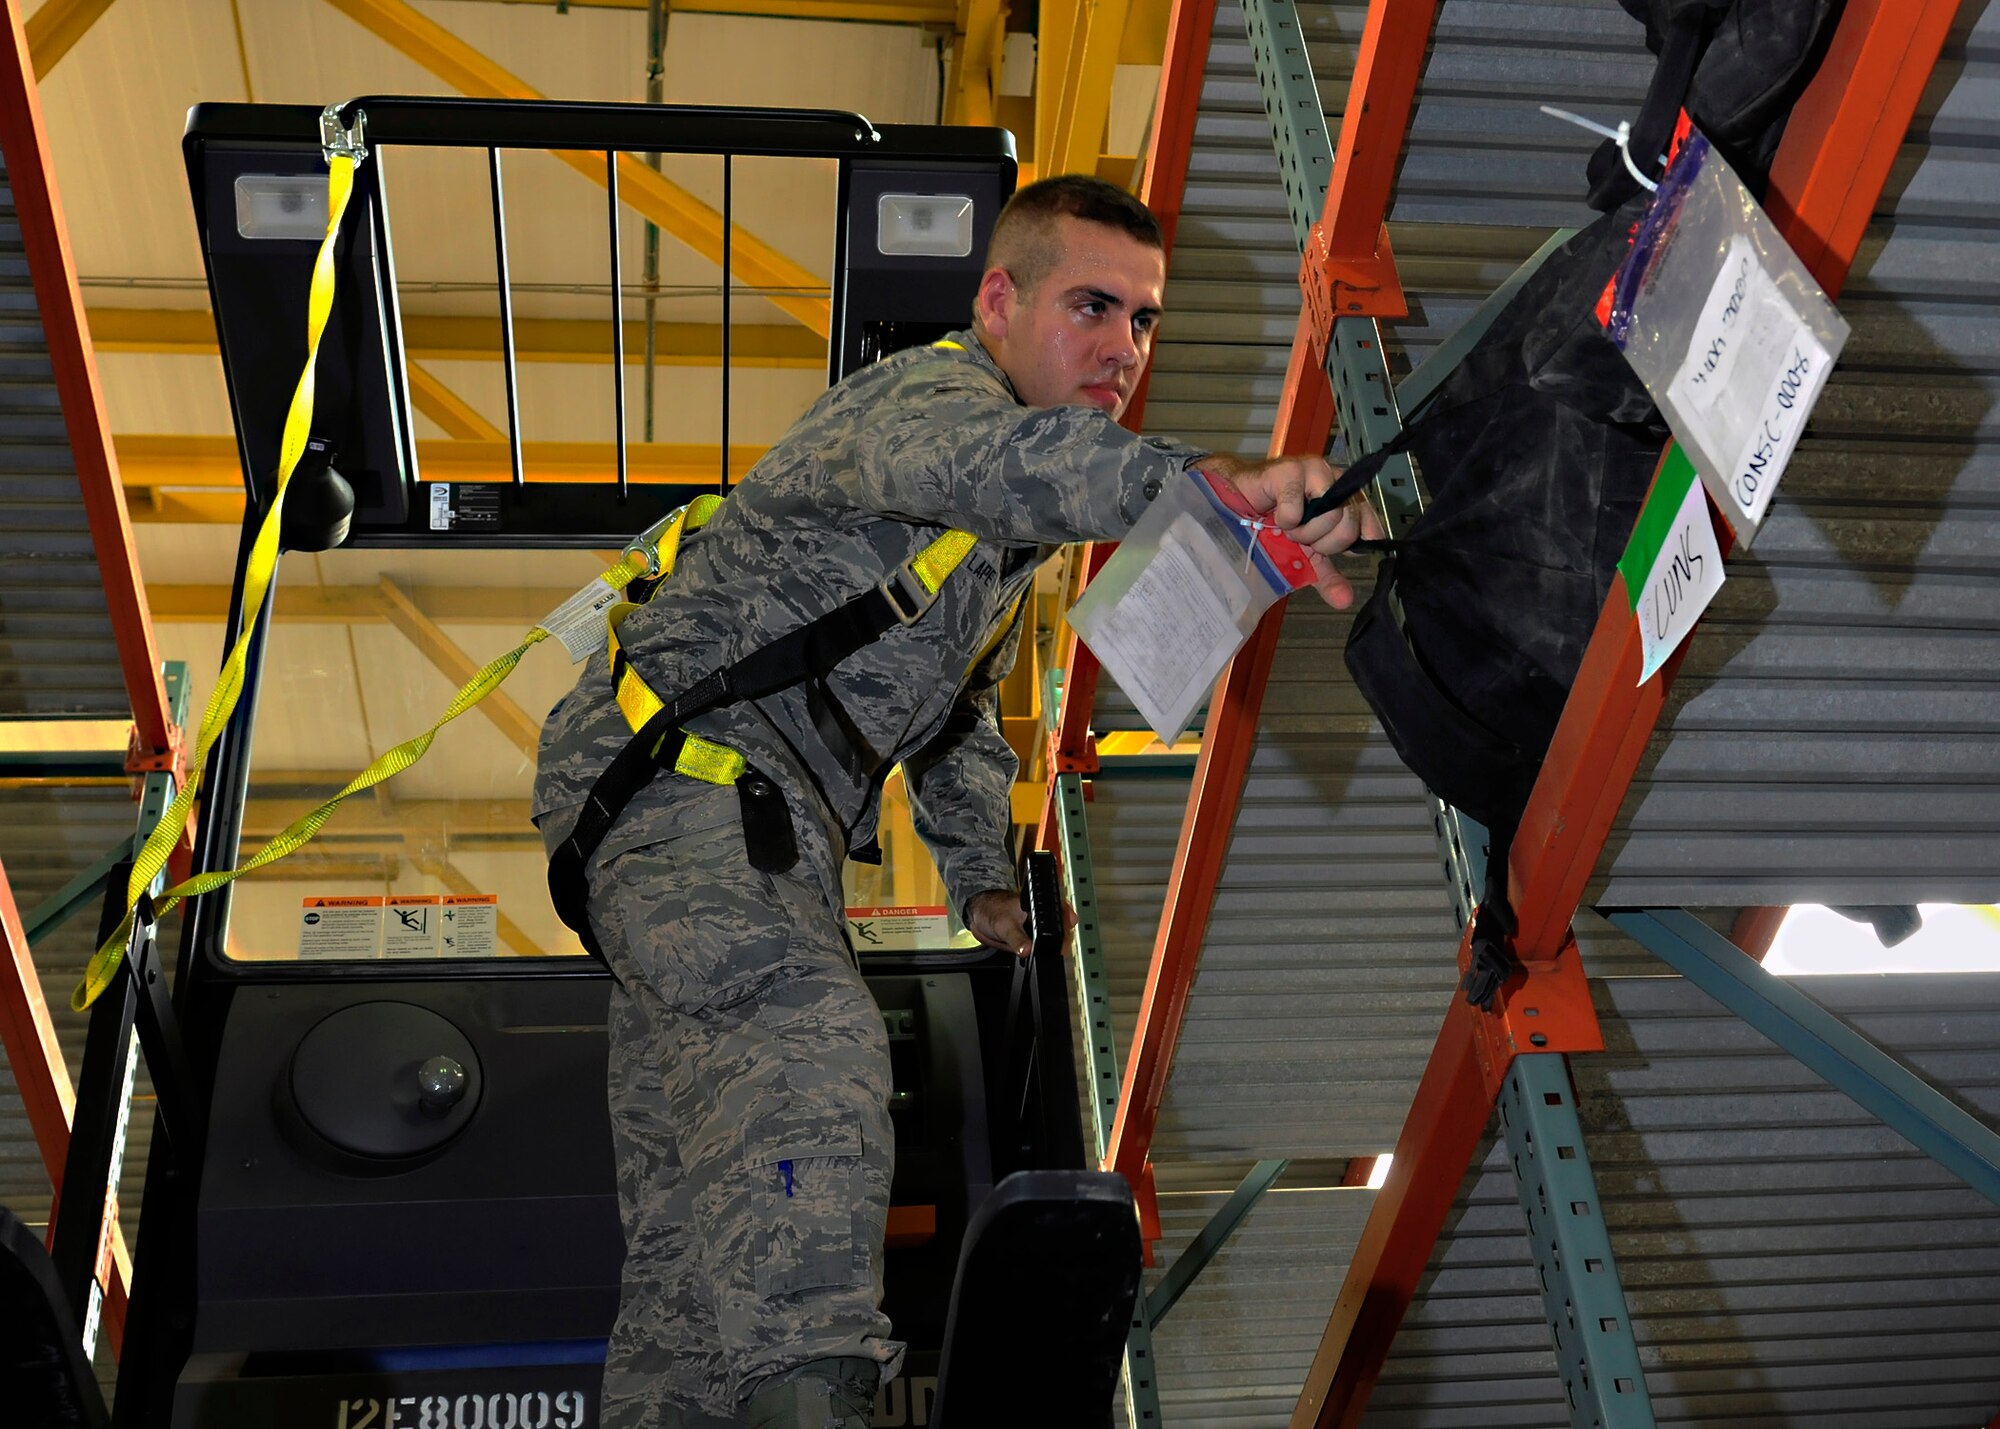 Airman 1st Class Jacob Lape, 39th Logistics Readiness Squadron material management journeyman, sorts mobility bags at the mobility warehouse July 22, 2014, Incirlik Air Base, Turkey. Mobility bags are kept on stand-by at all times in case of emergency. (U.S. Air Force photo by Staff Sgt. Eboni Reams/Released)